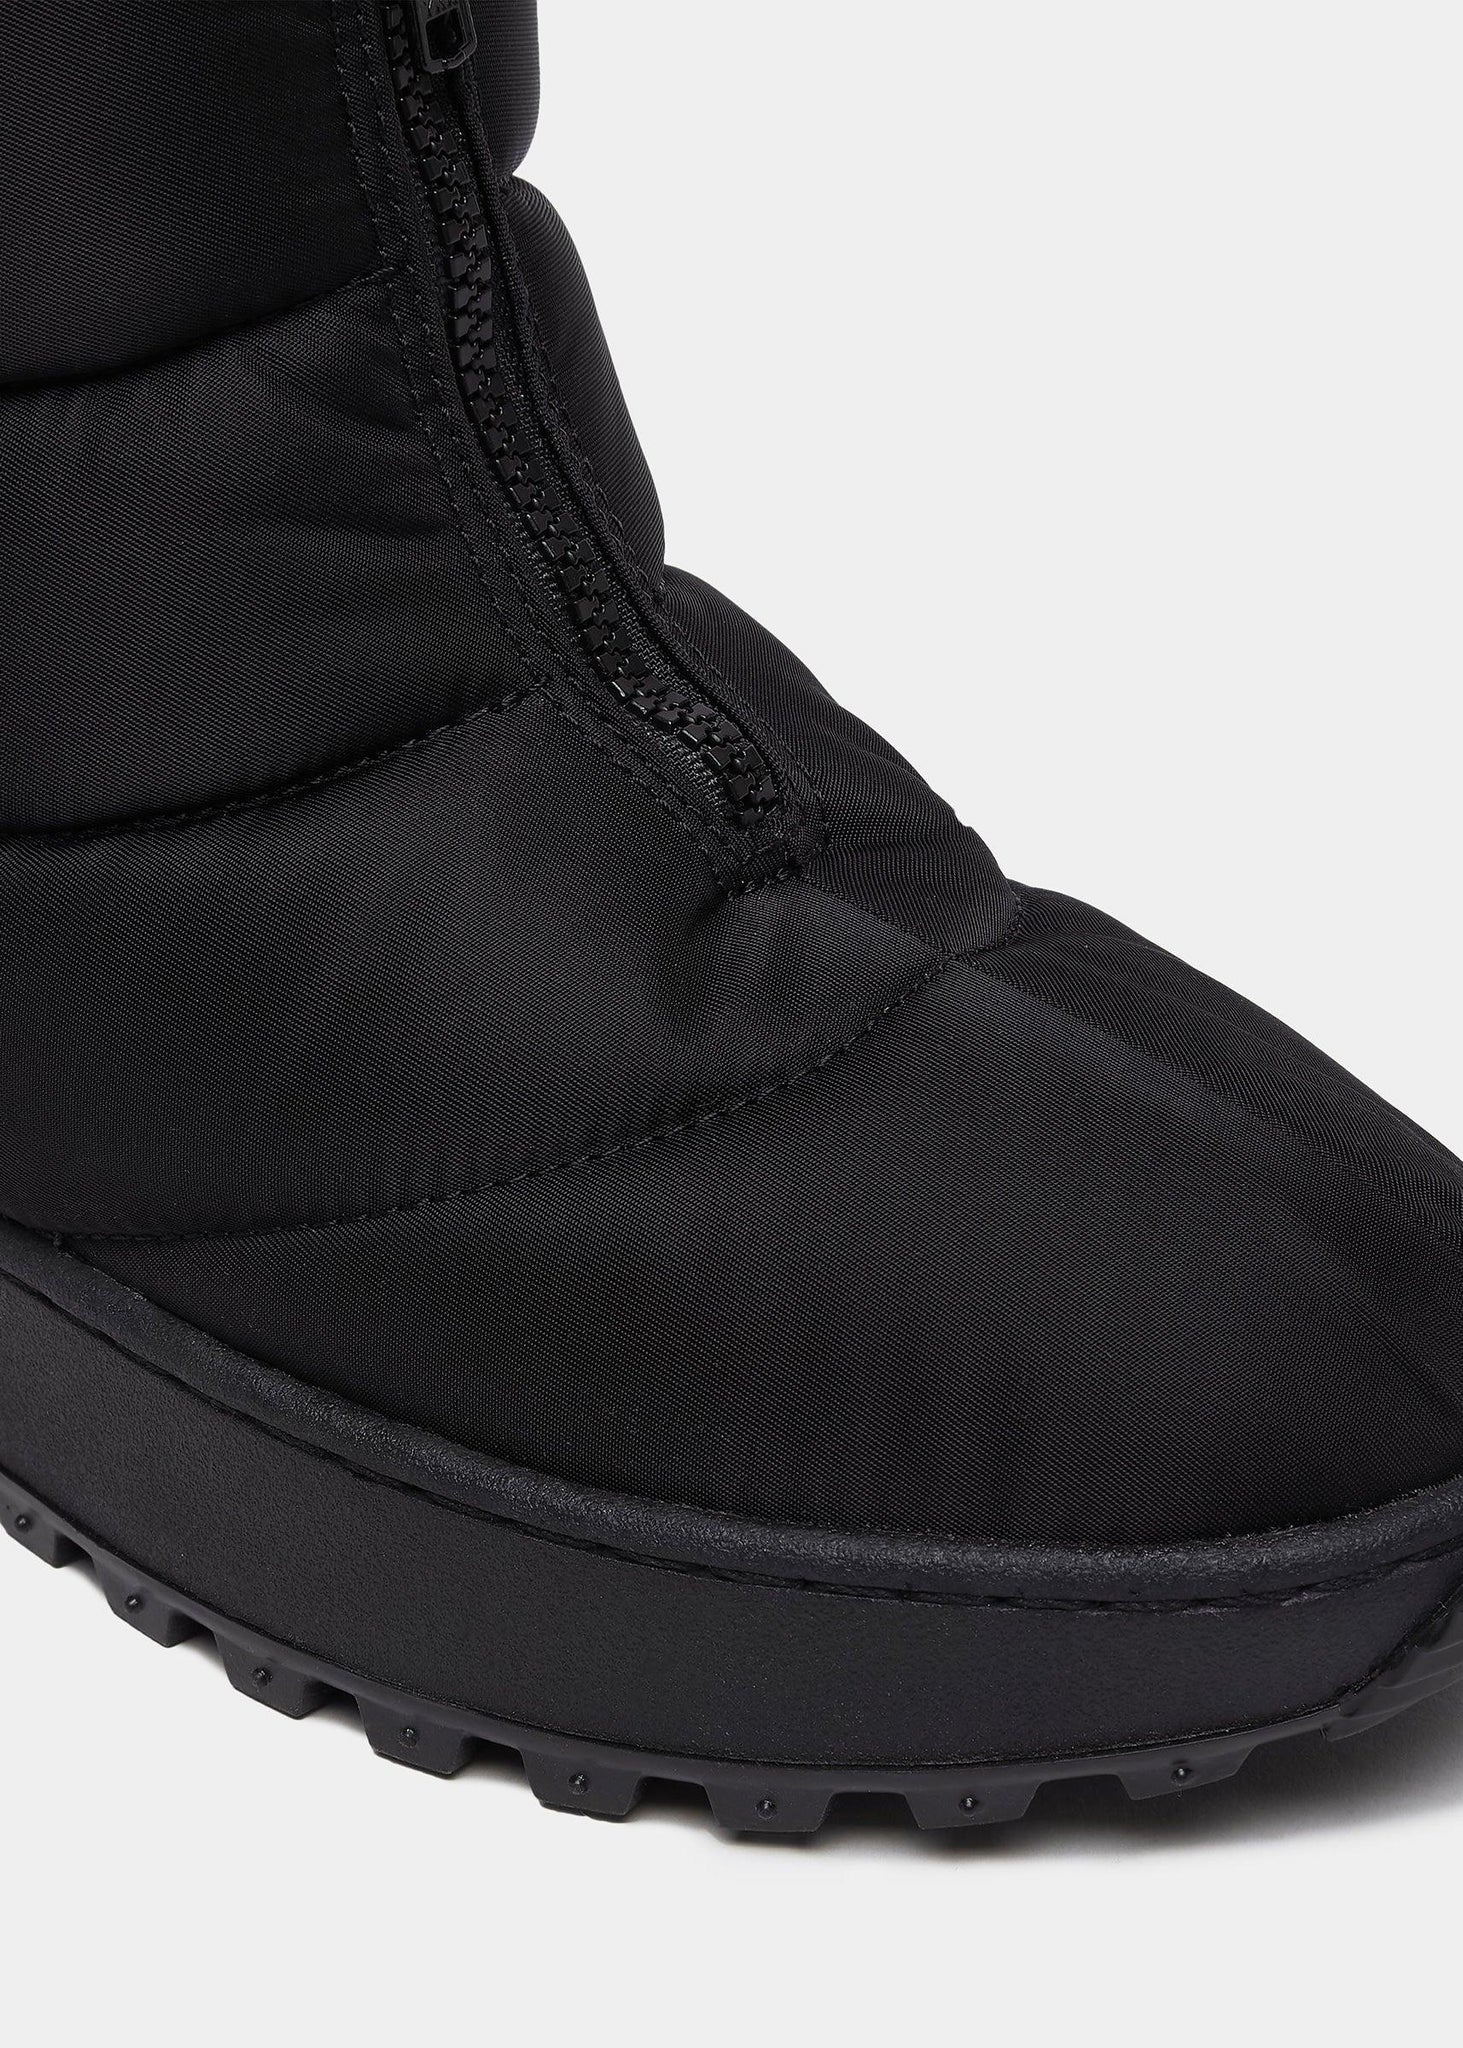 D.A.T.E Astra Black boot - MADE THE EDIT